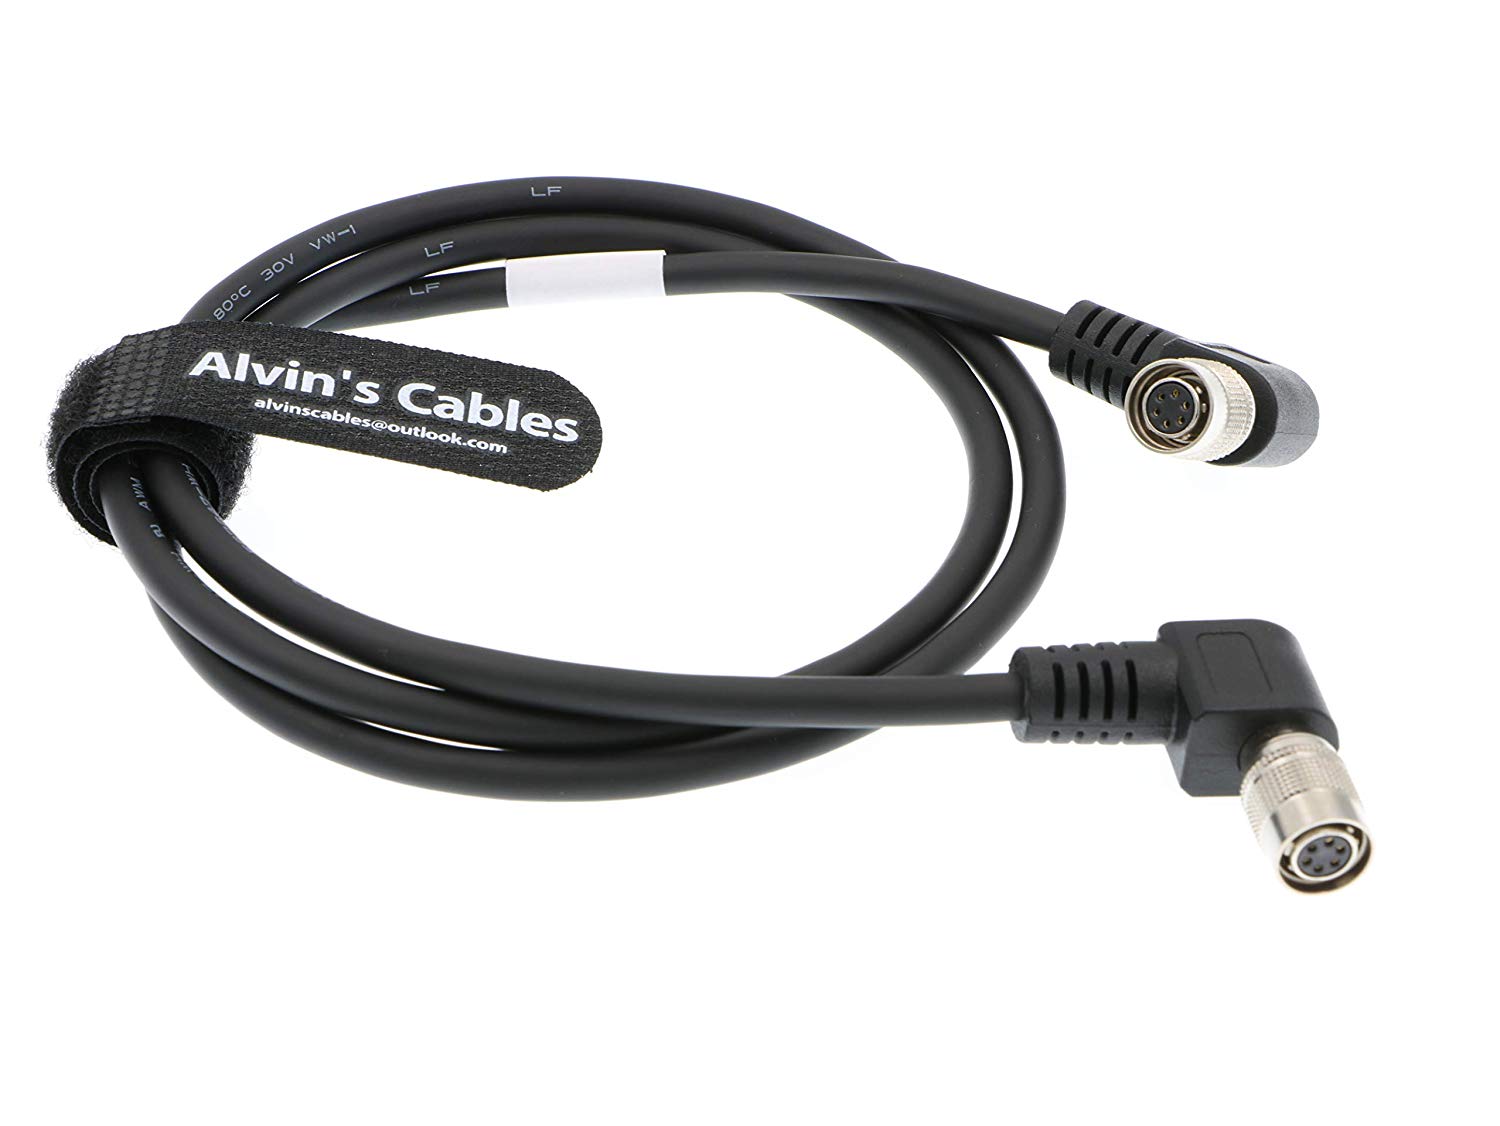 Alvin's Cables 6 Pin HR Right Angle Female Cable for Basler GIGE AVT CCD Camera 1M